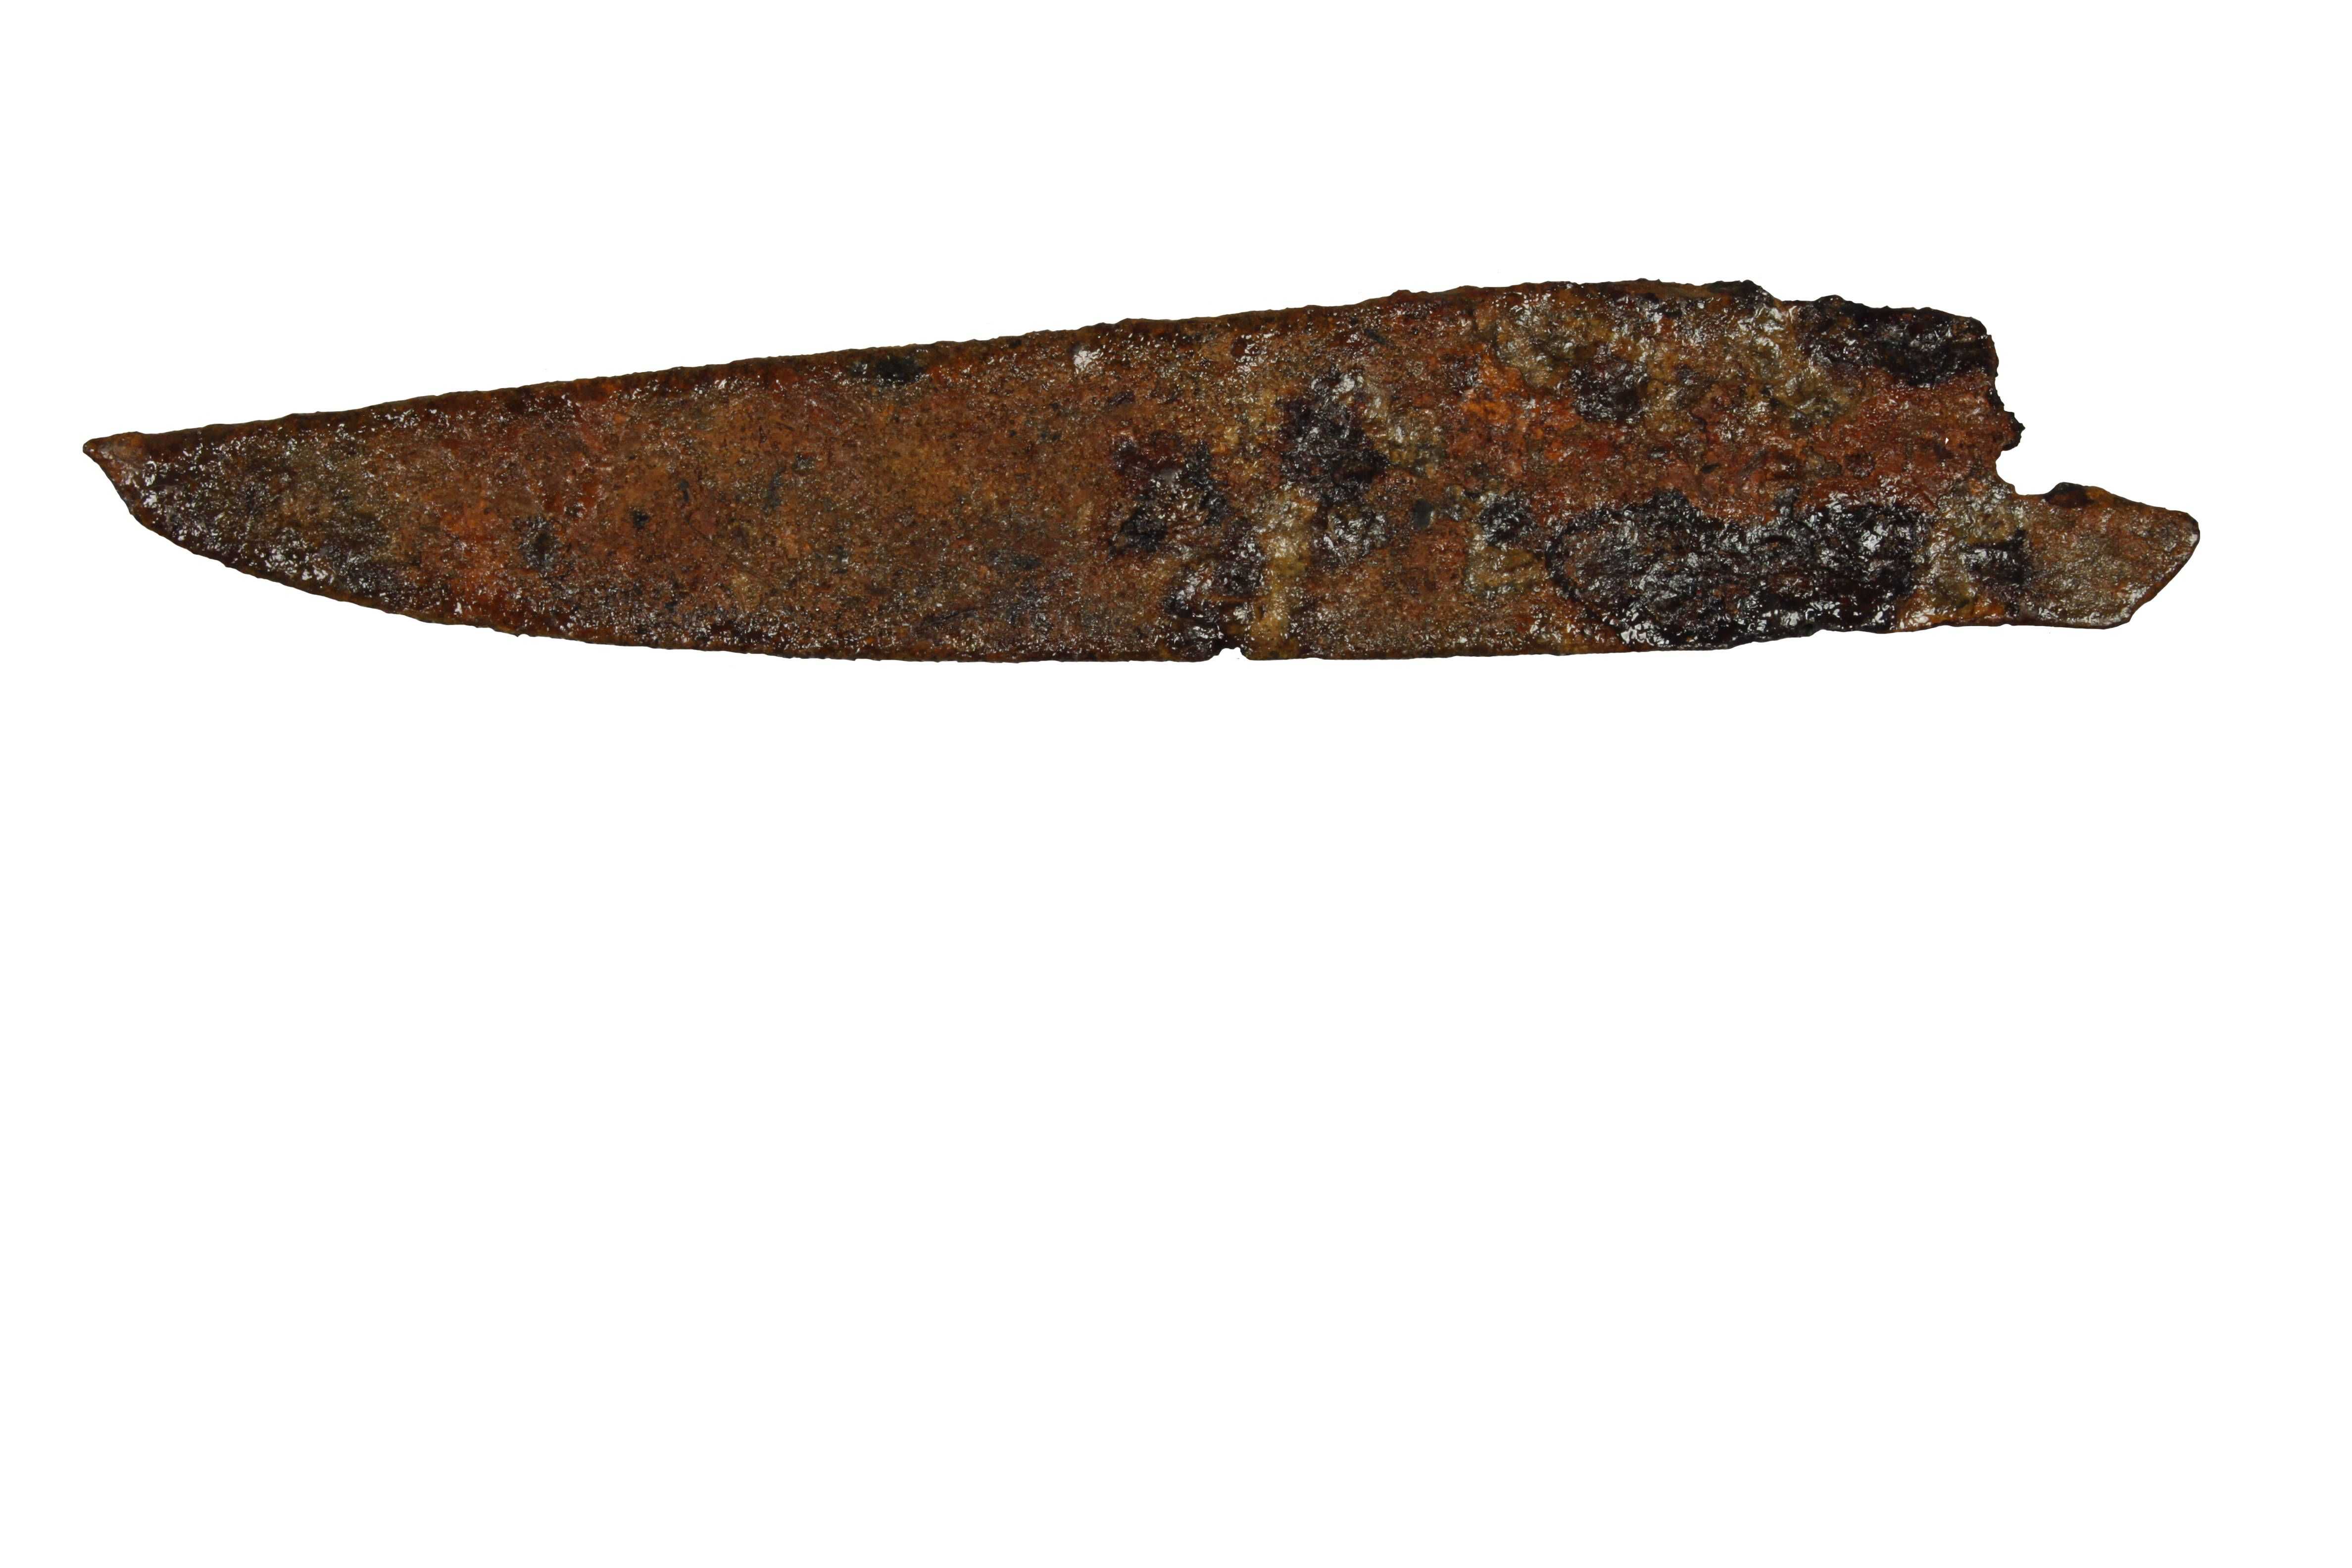 Photograph of a knife blade